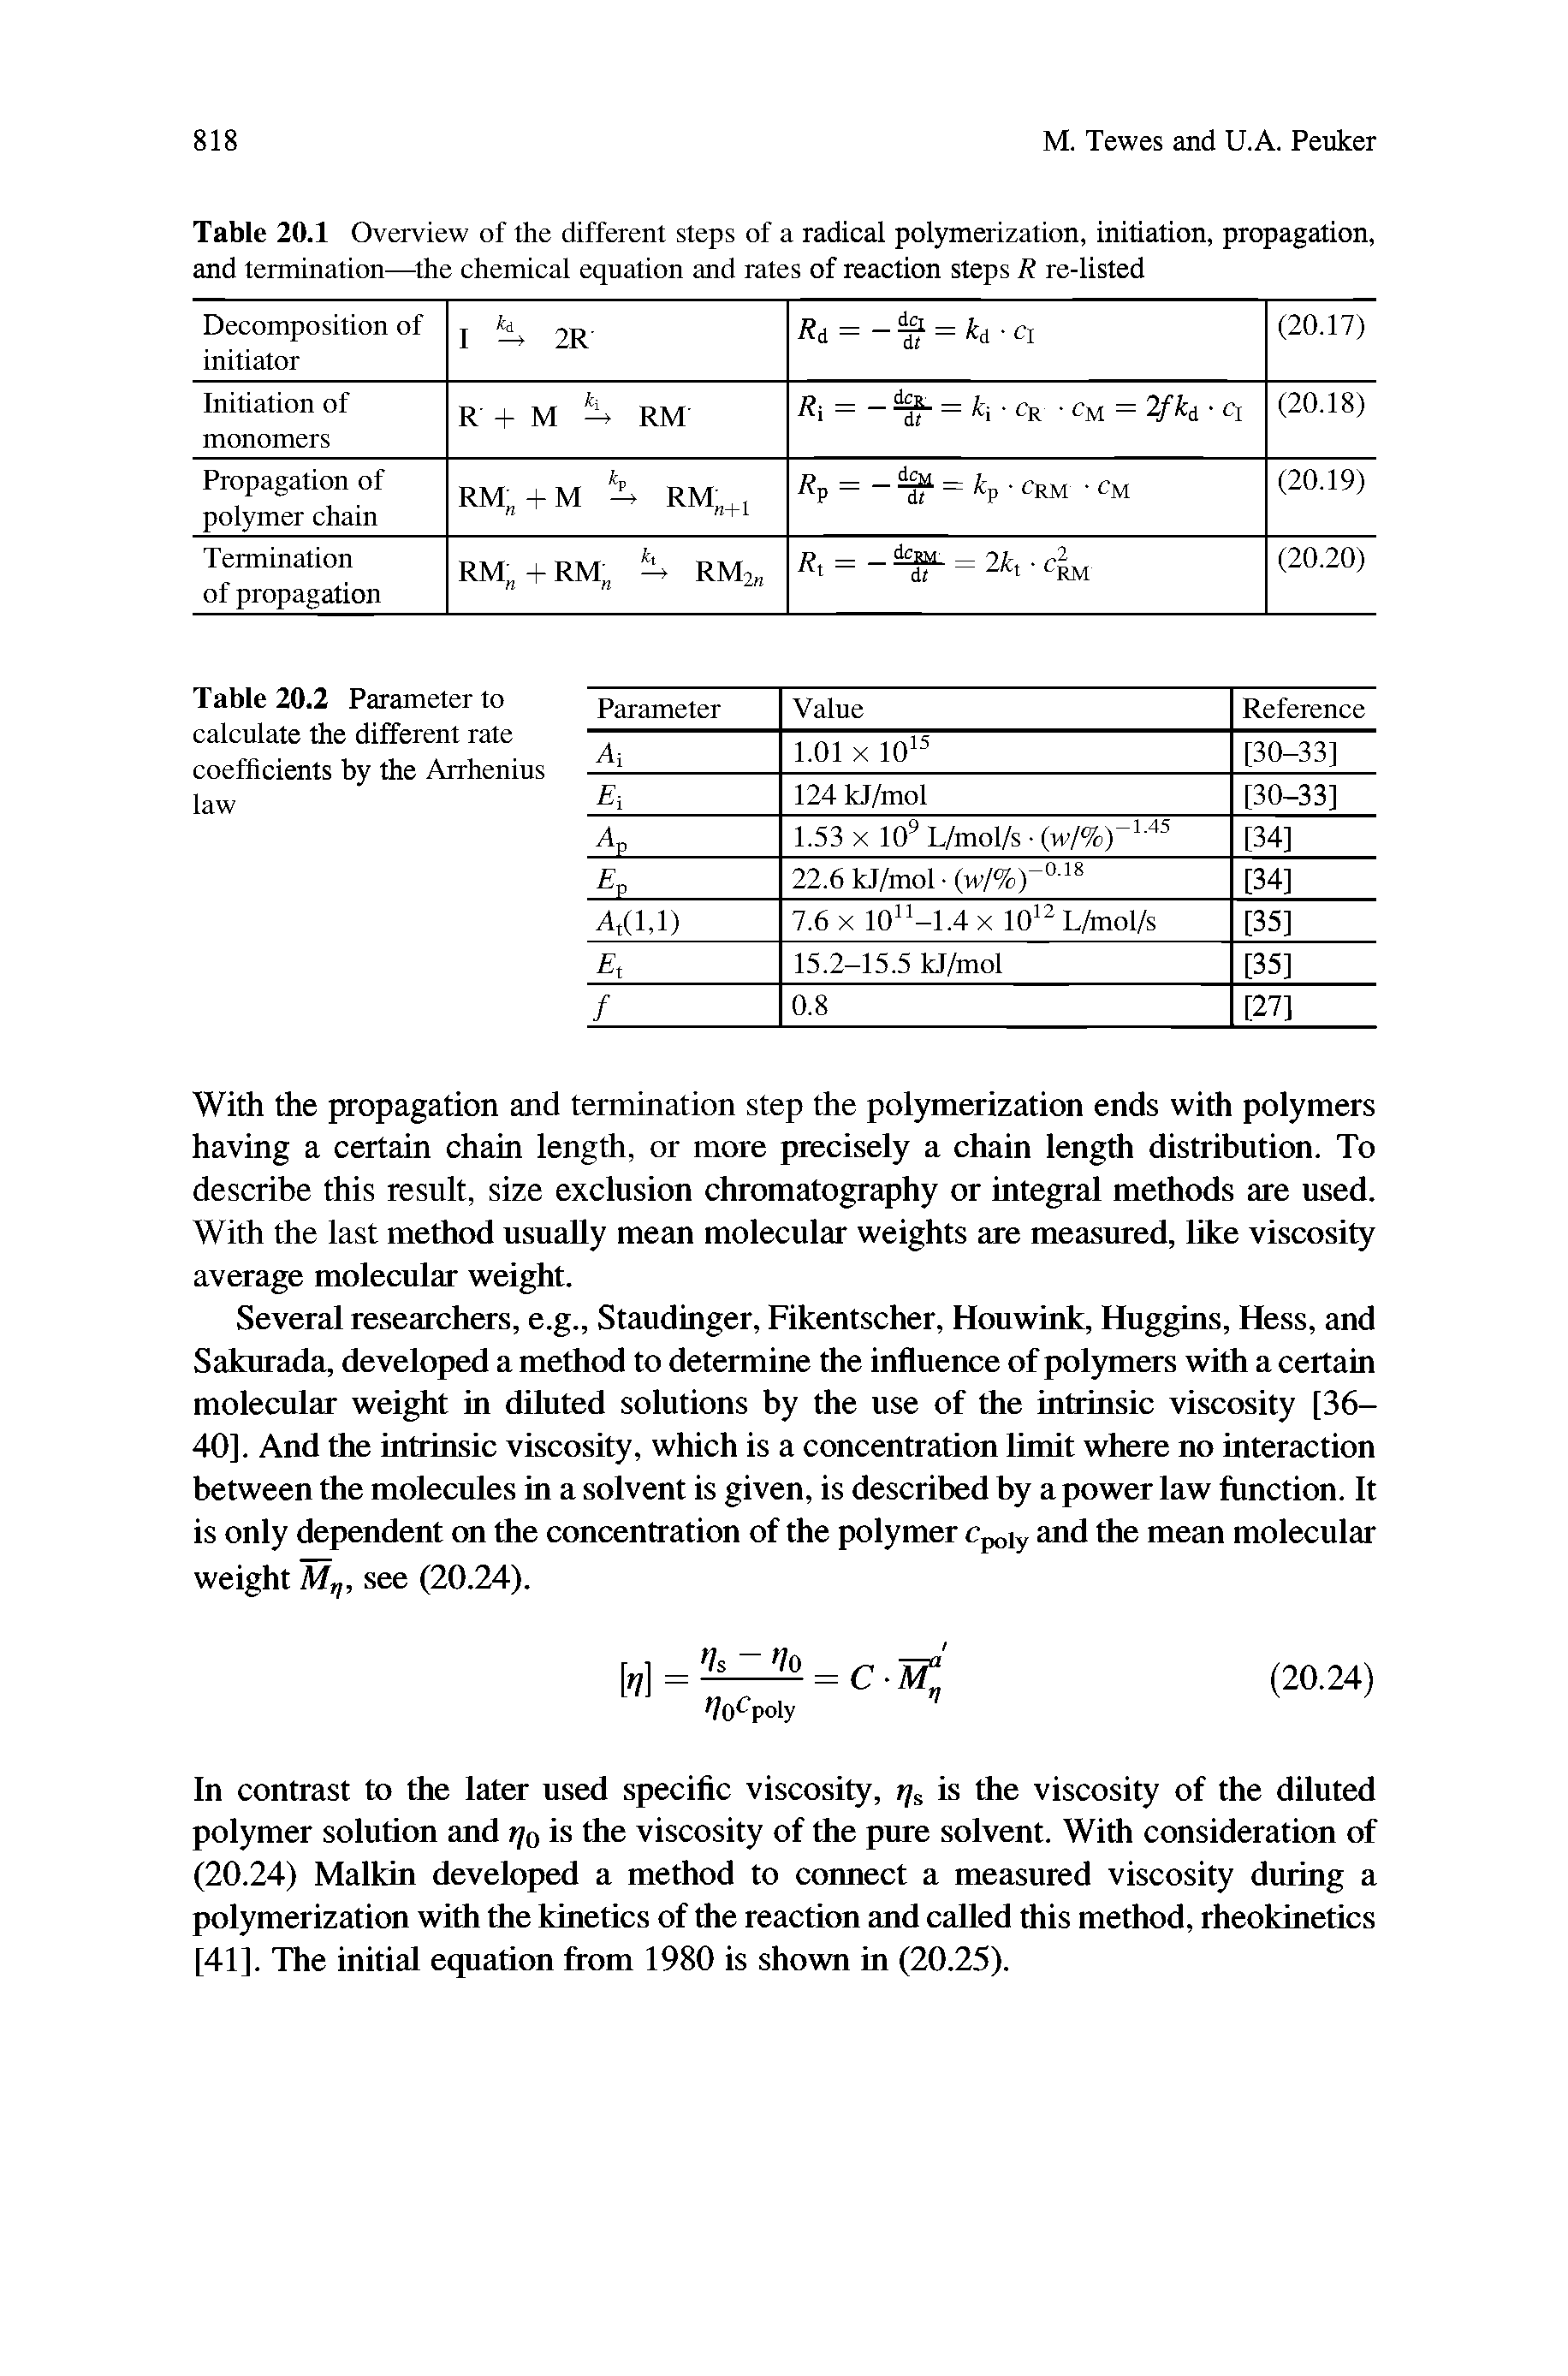 Table 20.1 Overview of the different steps of a radical polymerization, initiation, propagation, and termination— the chemical equation and rates of reaction steps R re-listed...